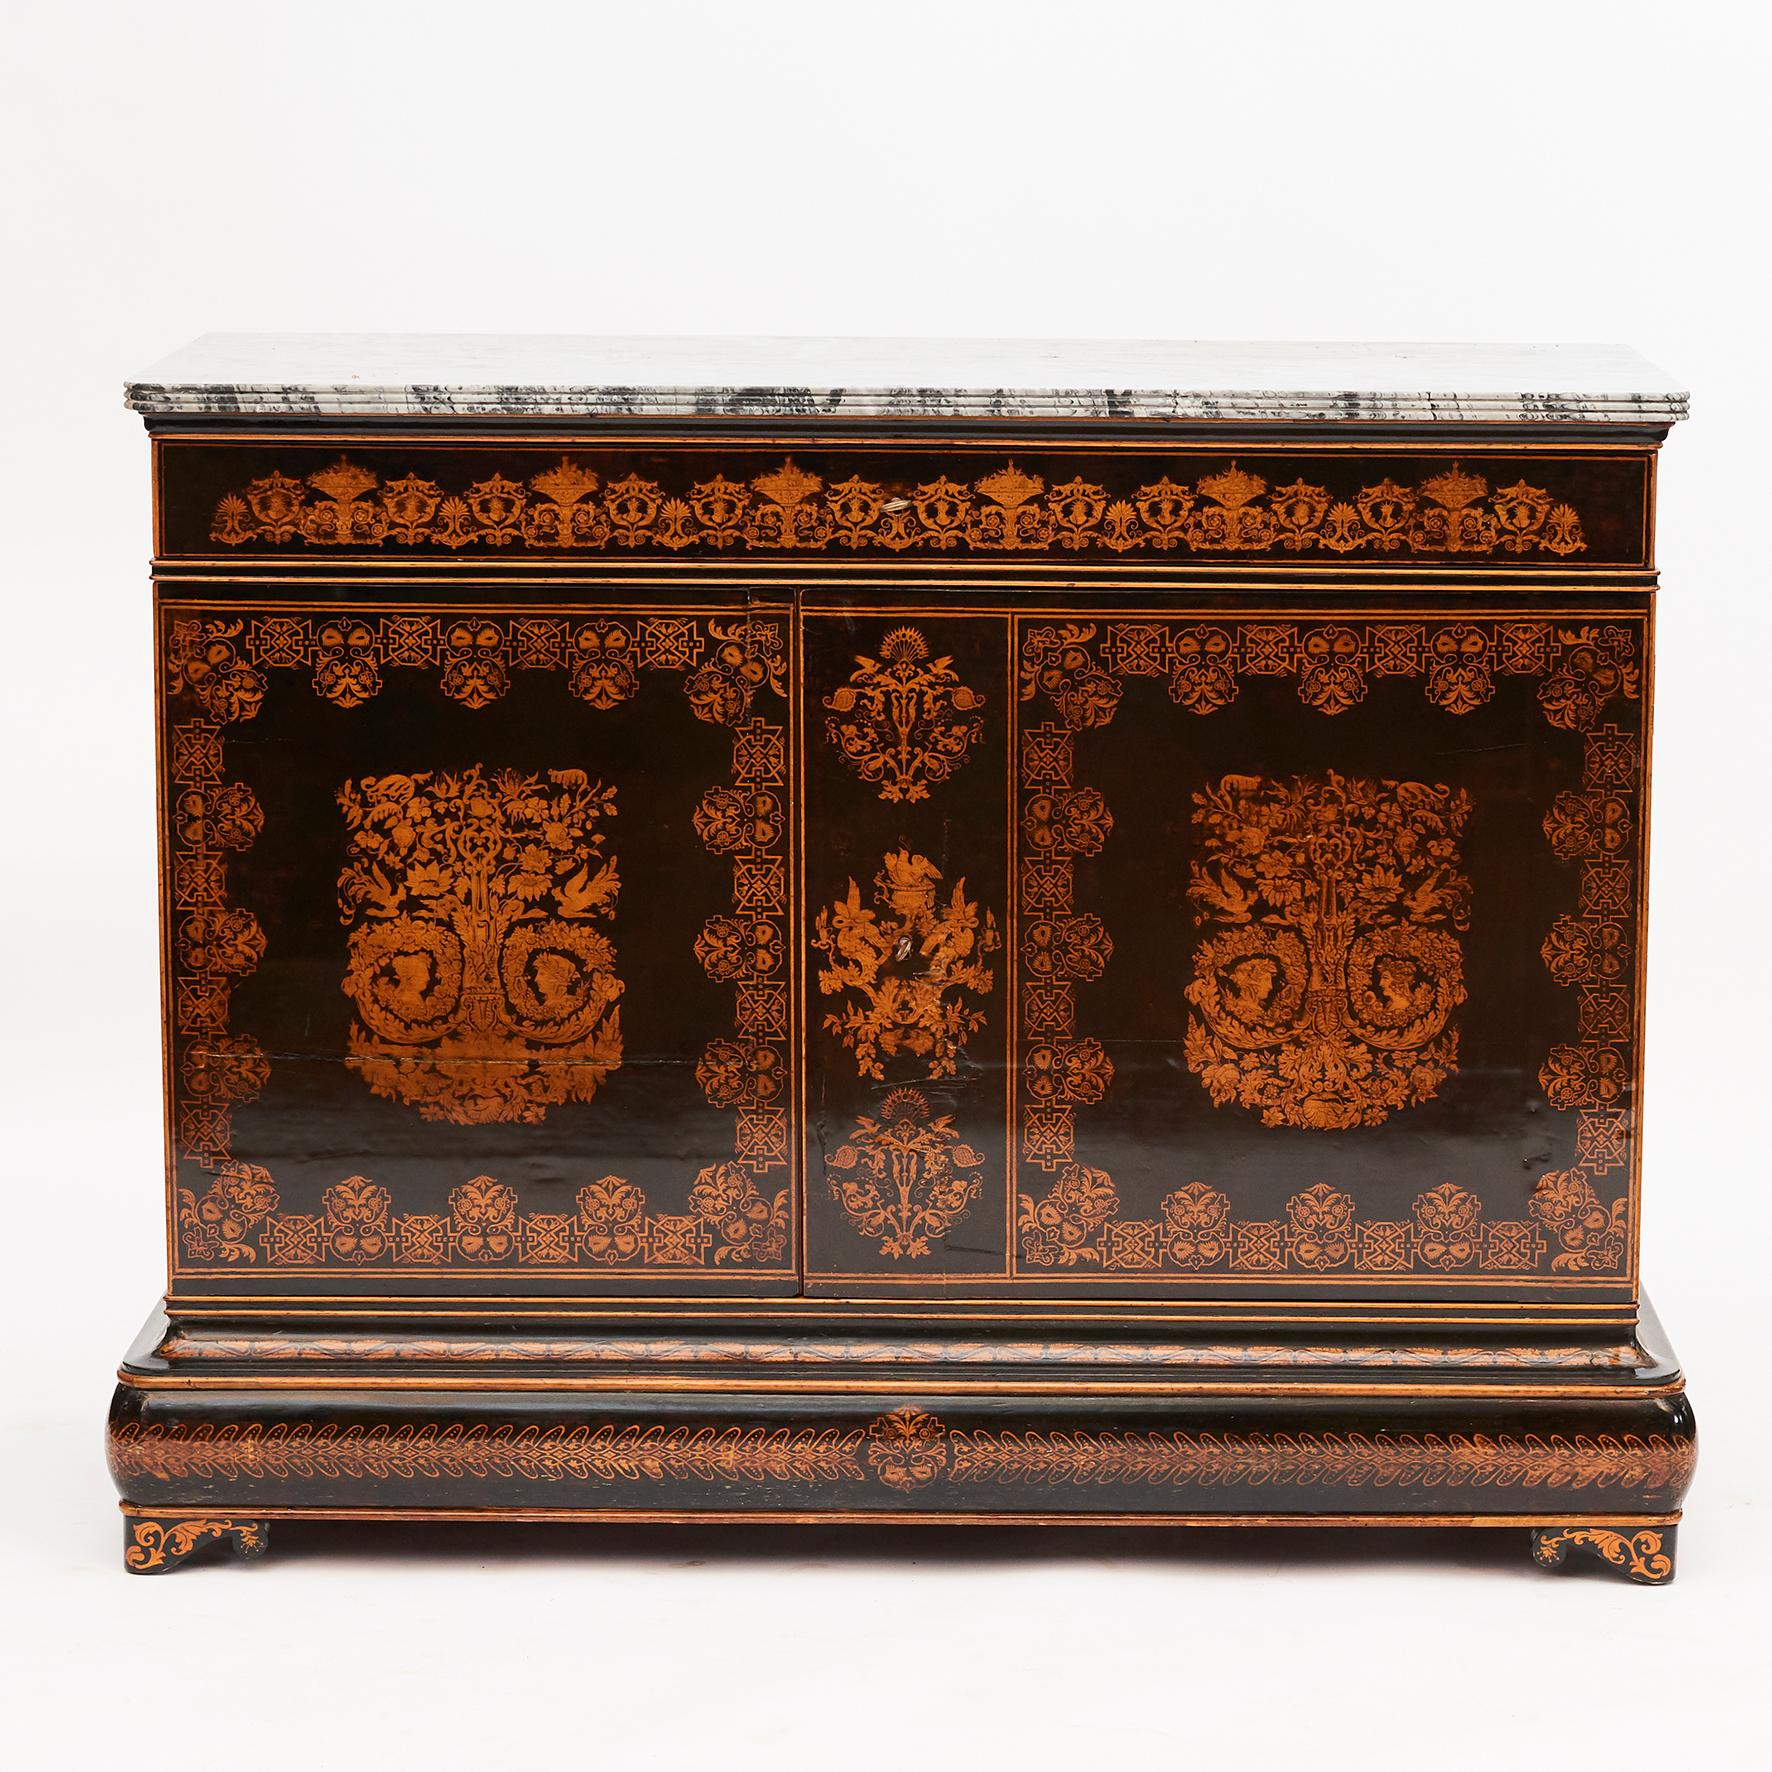 A Louis Philippe fruitwood cabinet with blue Turin marble top, sides and front richly decorated with a design of figures and ornaments, front with two doors behind which drawers. 

Signed G. Durand, Paris.
Mid-19th century.
Measures: H. 98 cm., W.